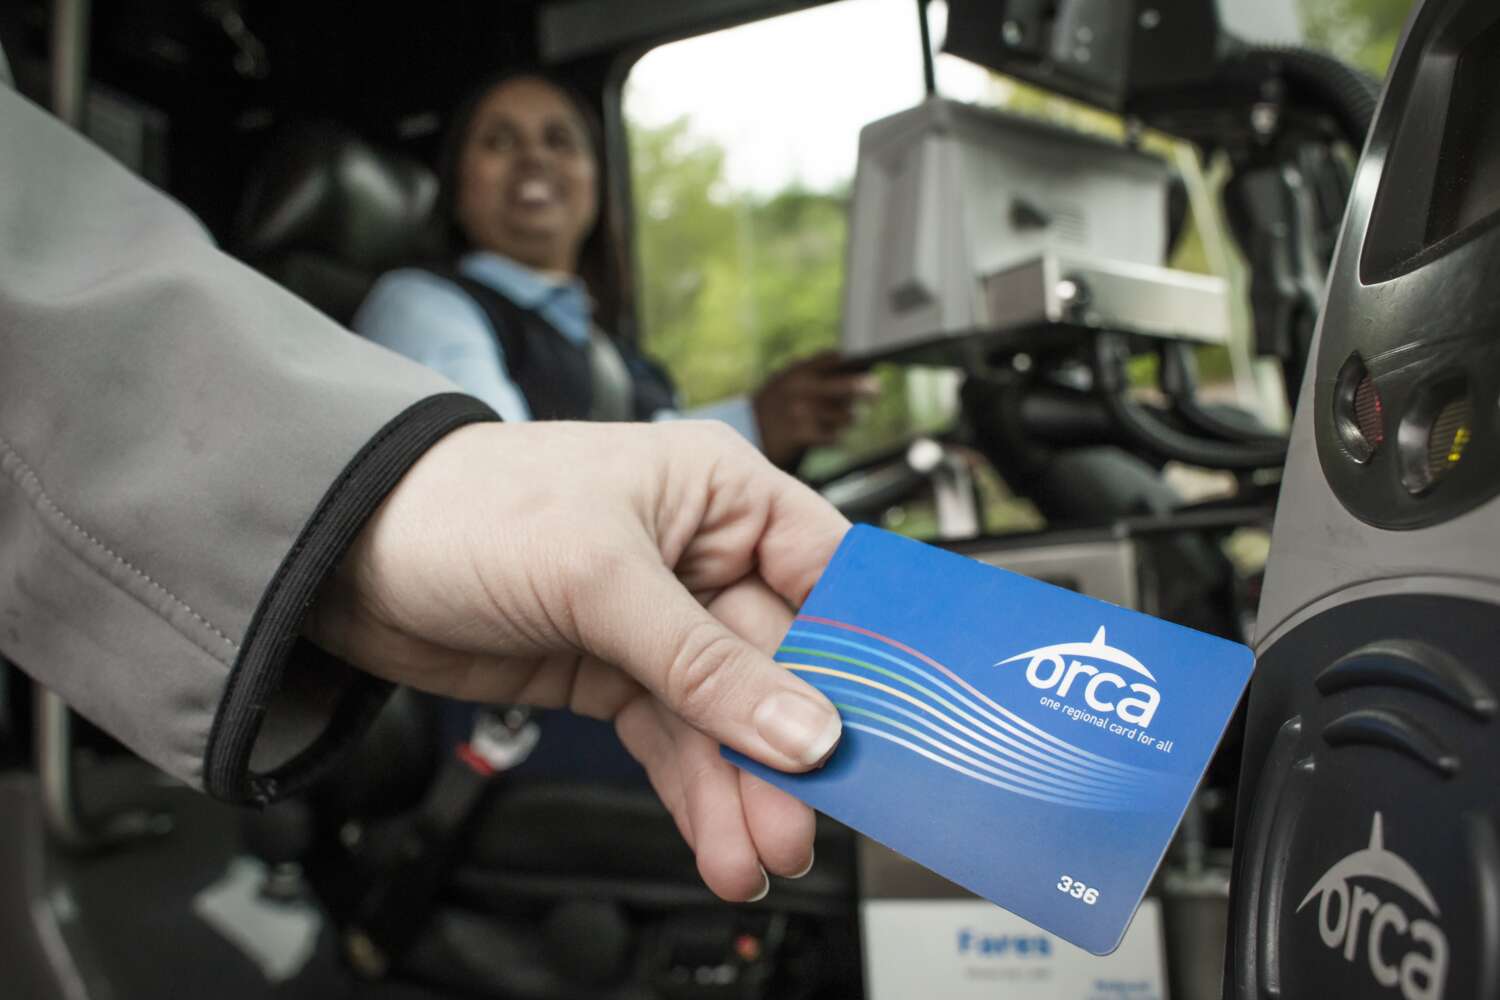 Rider uses ORCA card to board a Community Transit bus